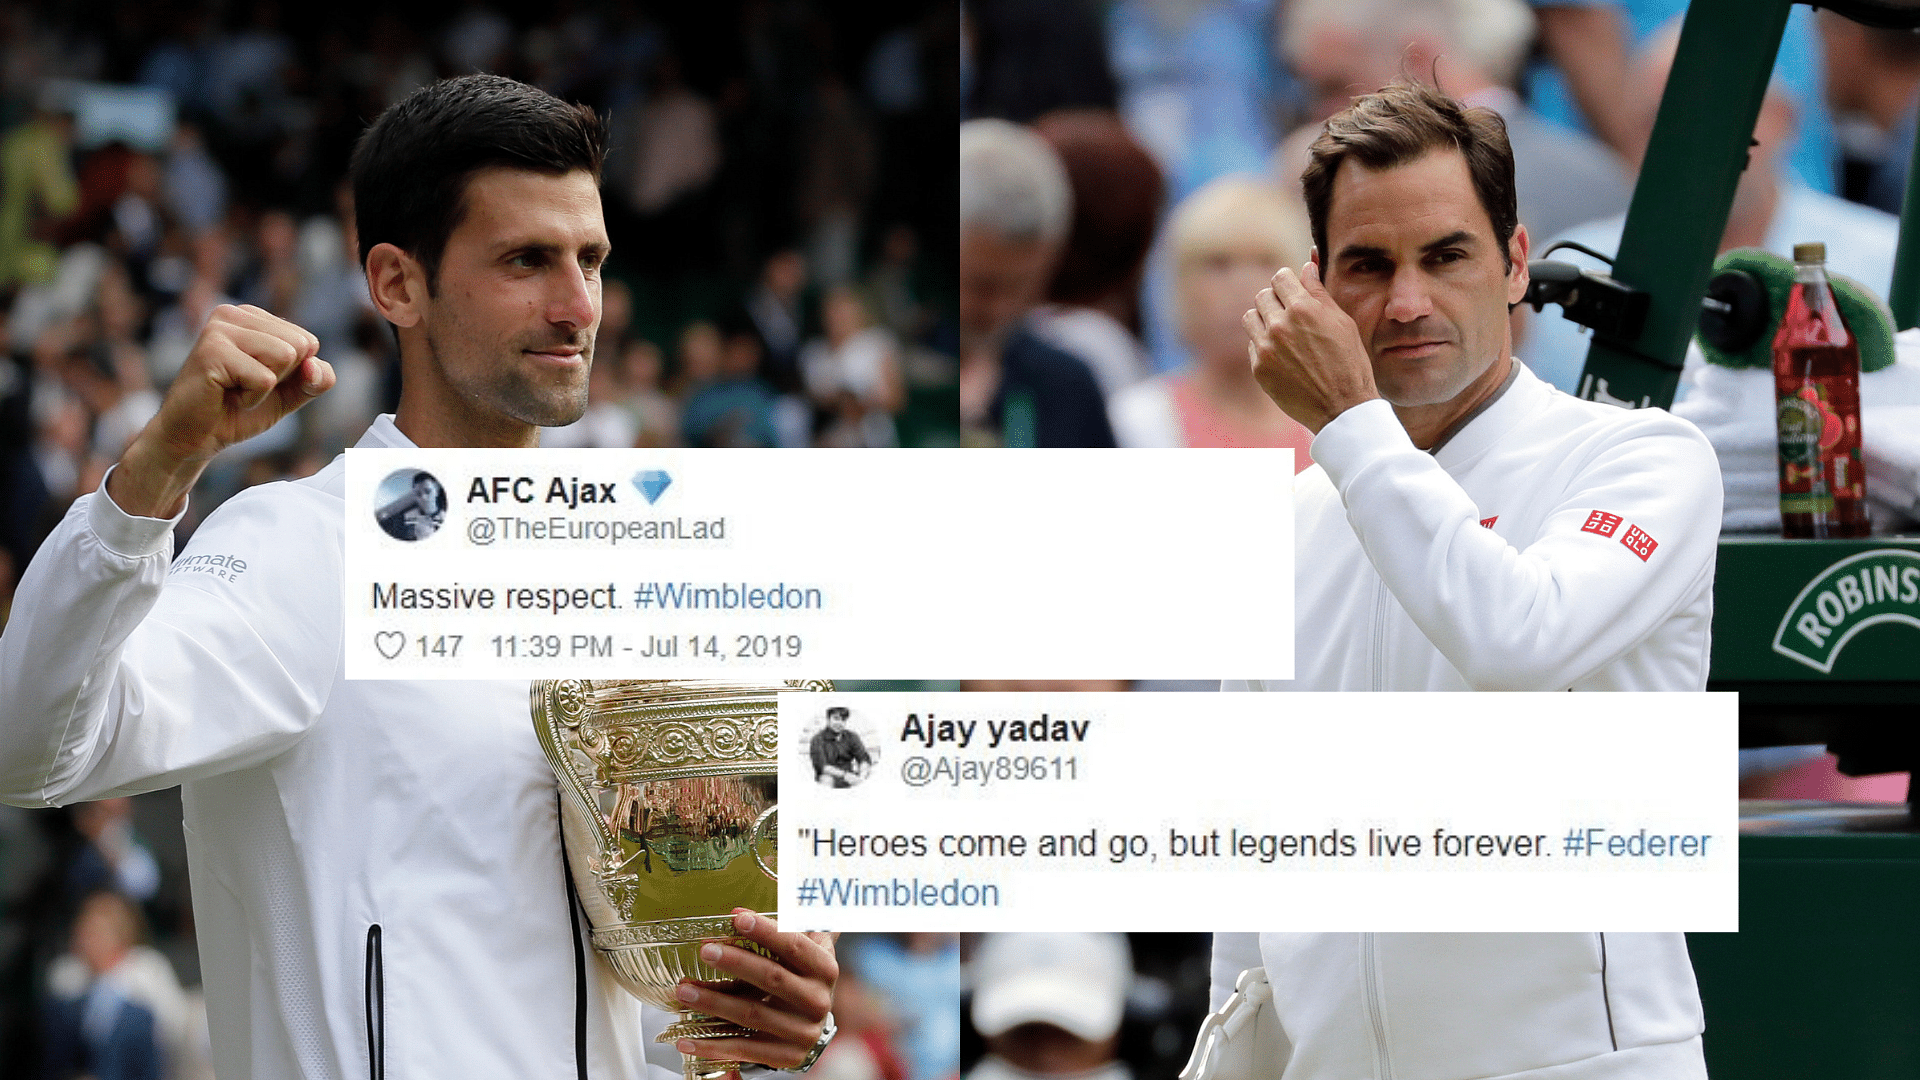 Wimbledon 2019 Men’s Final Twitter Reactions: Of Legends and Icons